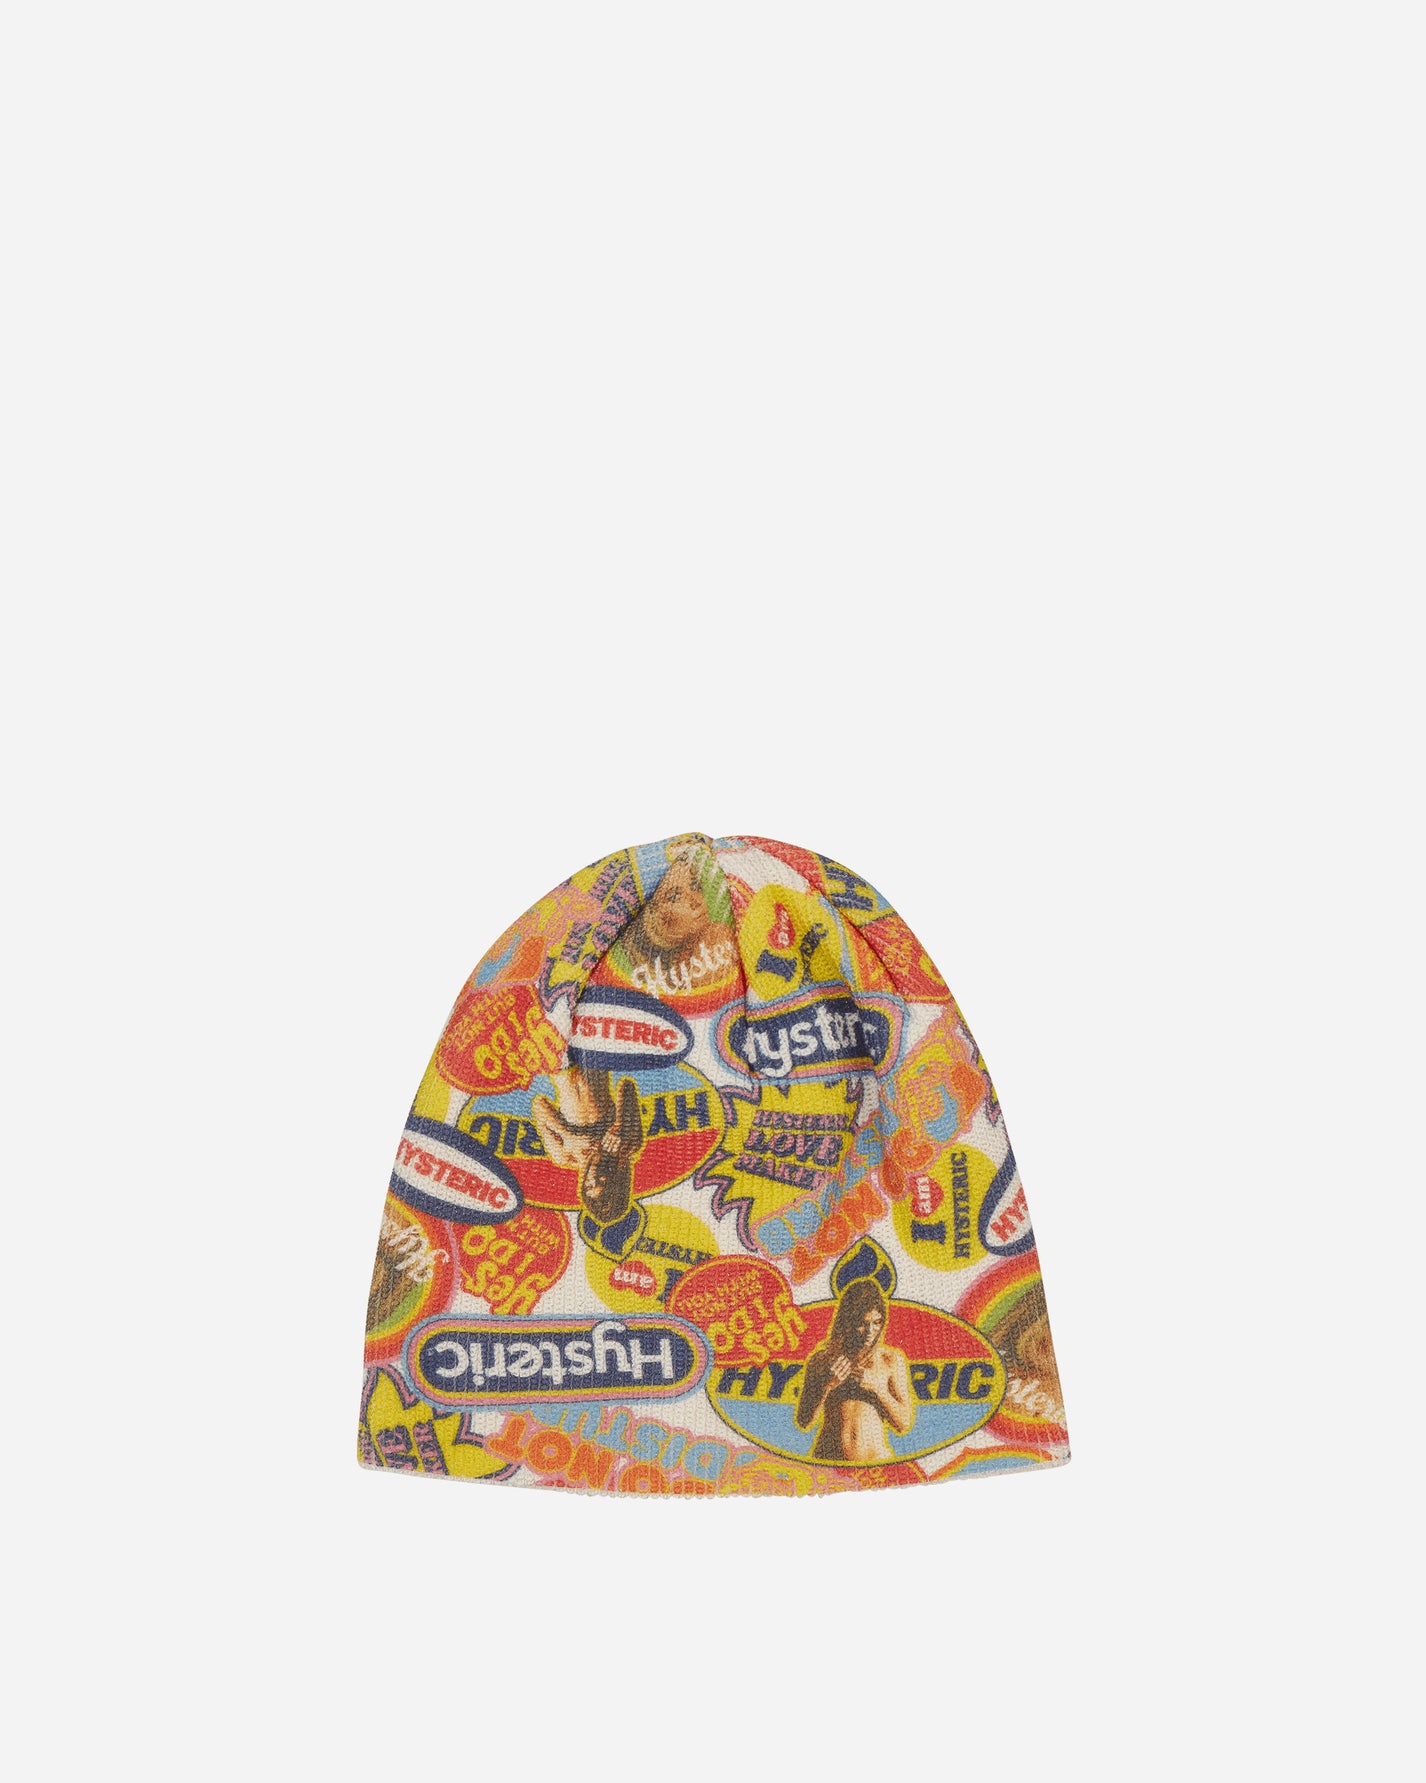 Hysteric Glamour Wmns Typical Hysteric Multi Hats Beanies 01241QH039 A